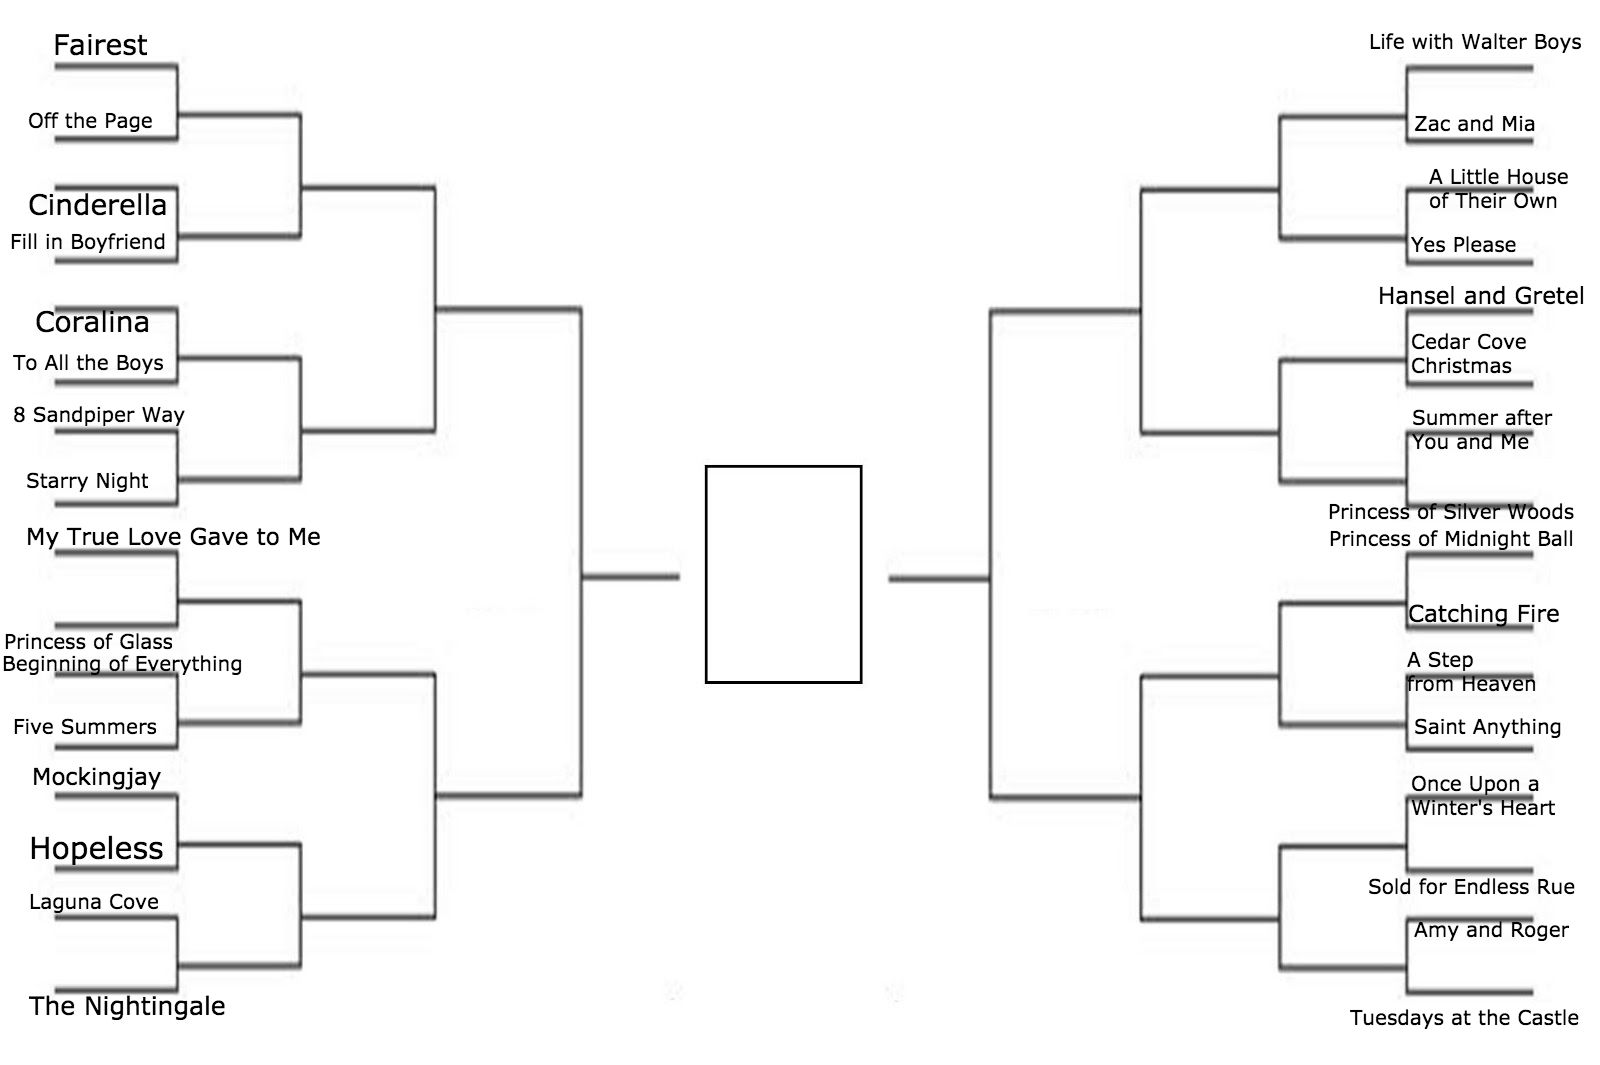 Rachael Turns Pages 2015 Book of the Year Bracket Challenge Bracket